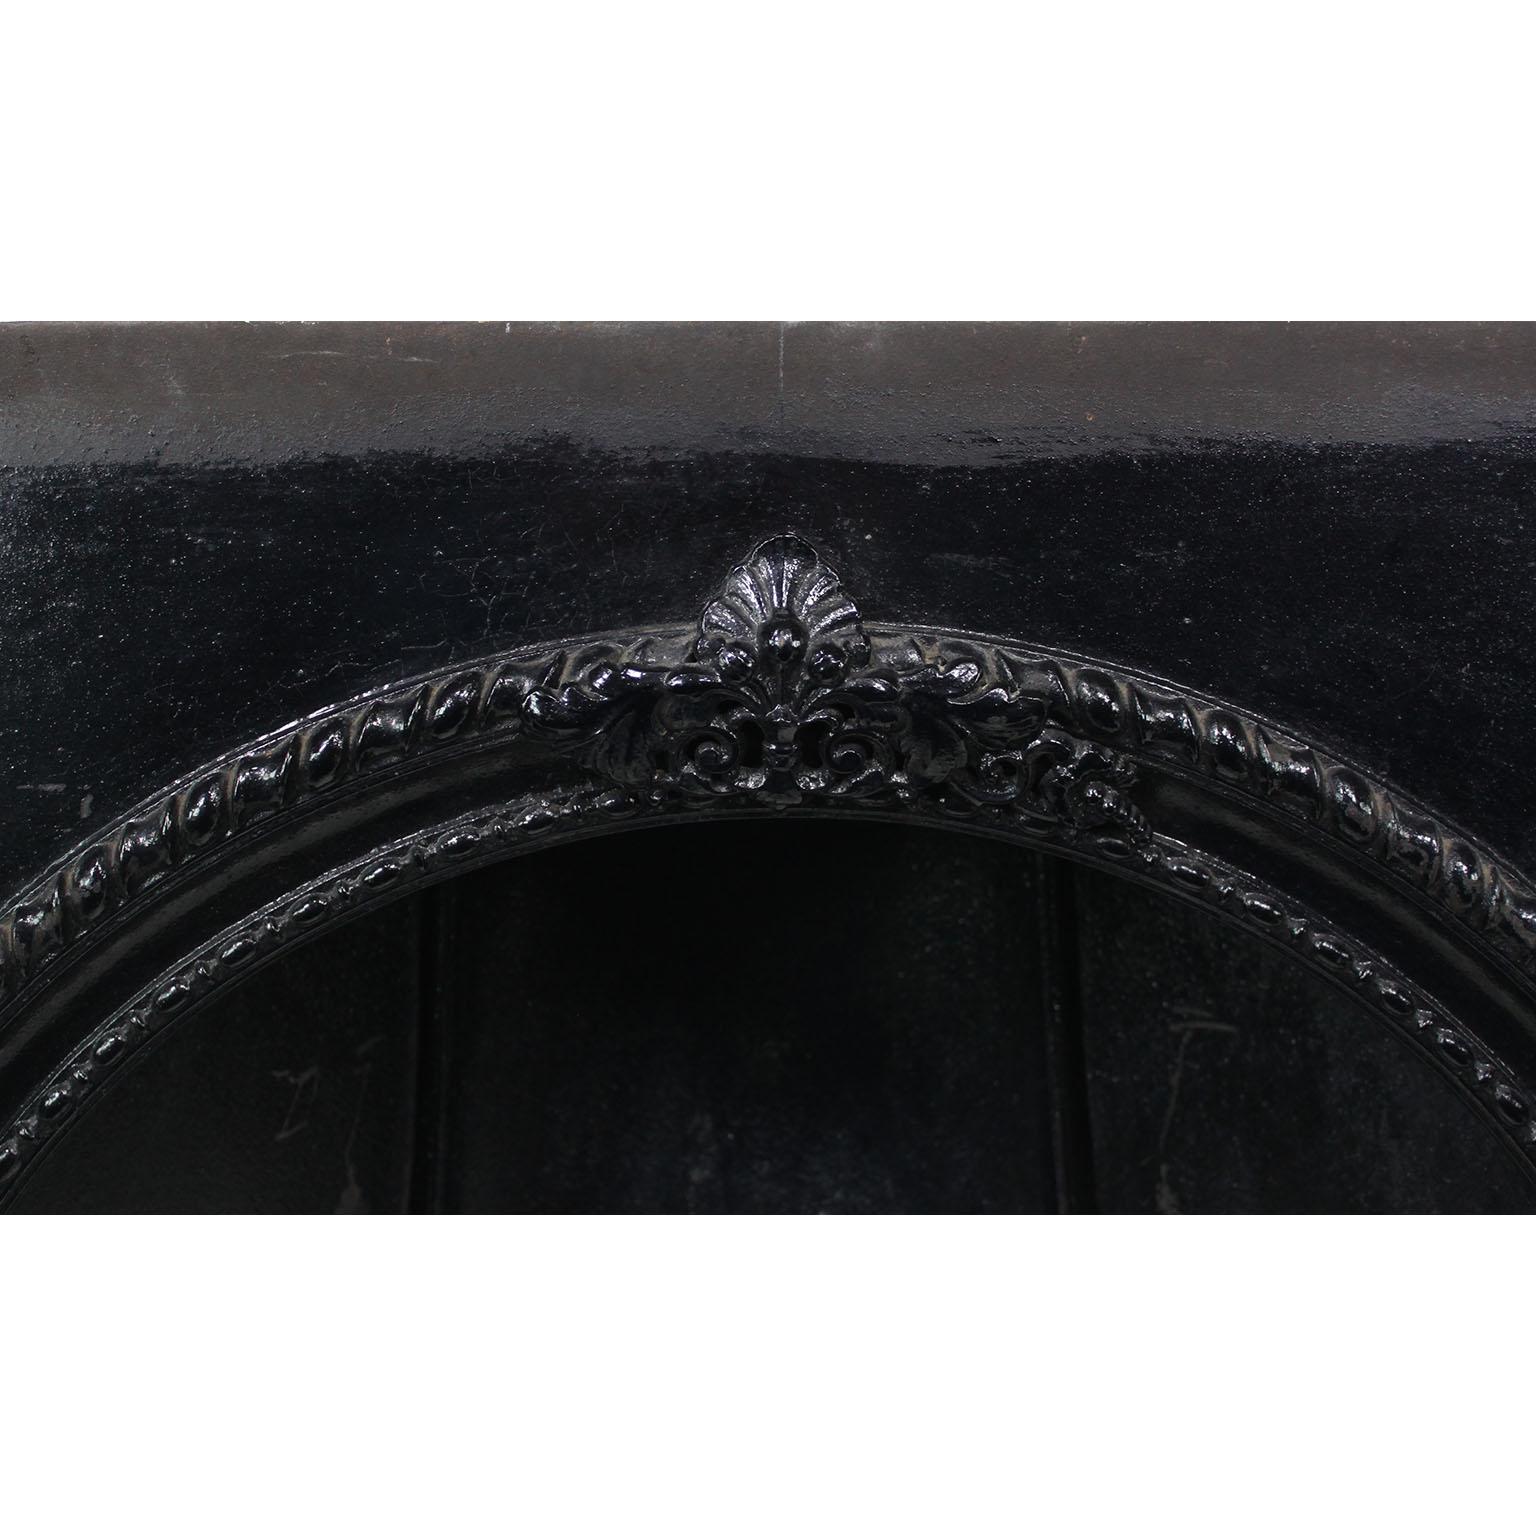 Colonial Revival A French 19th Century Cast Iron Fireplace Mantel Wood/Coal Register Insert Grate For Sale